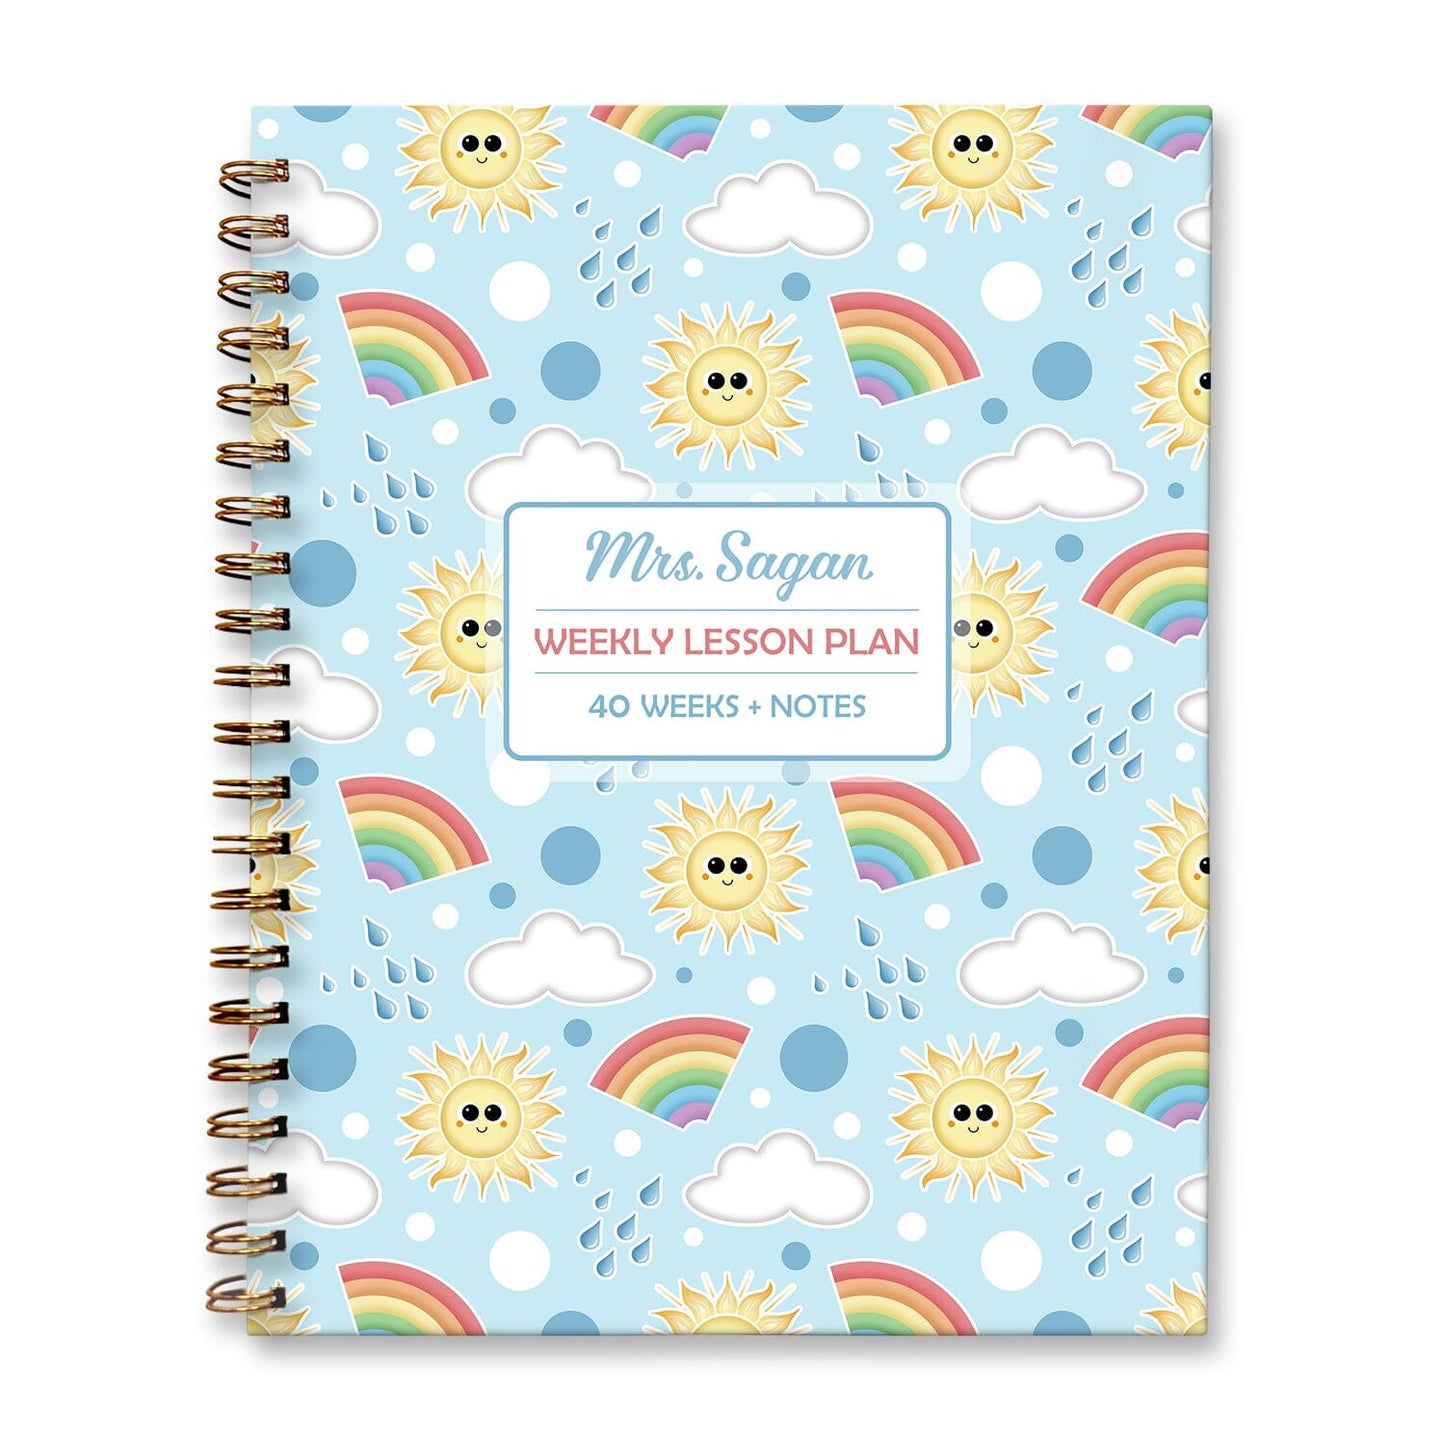 Personalized Sunshine Rainbows Weekly Lesson Plan Book at Artistically Invited. Hardcover planner book for teachers or homeschooling.